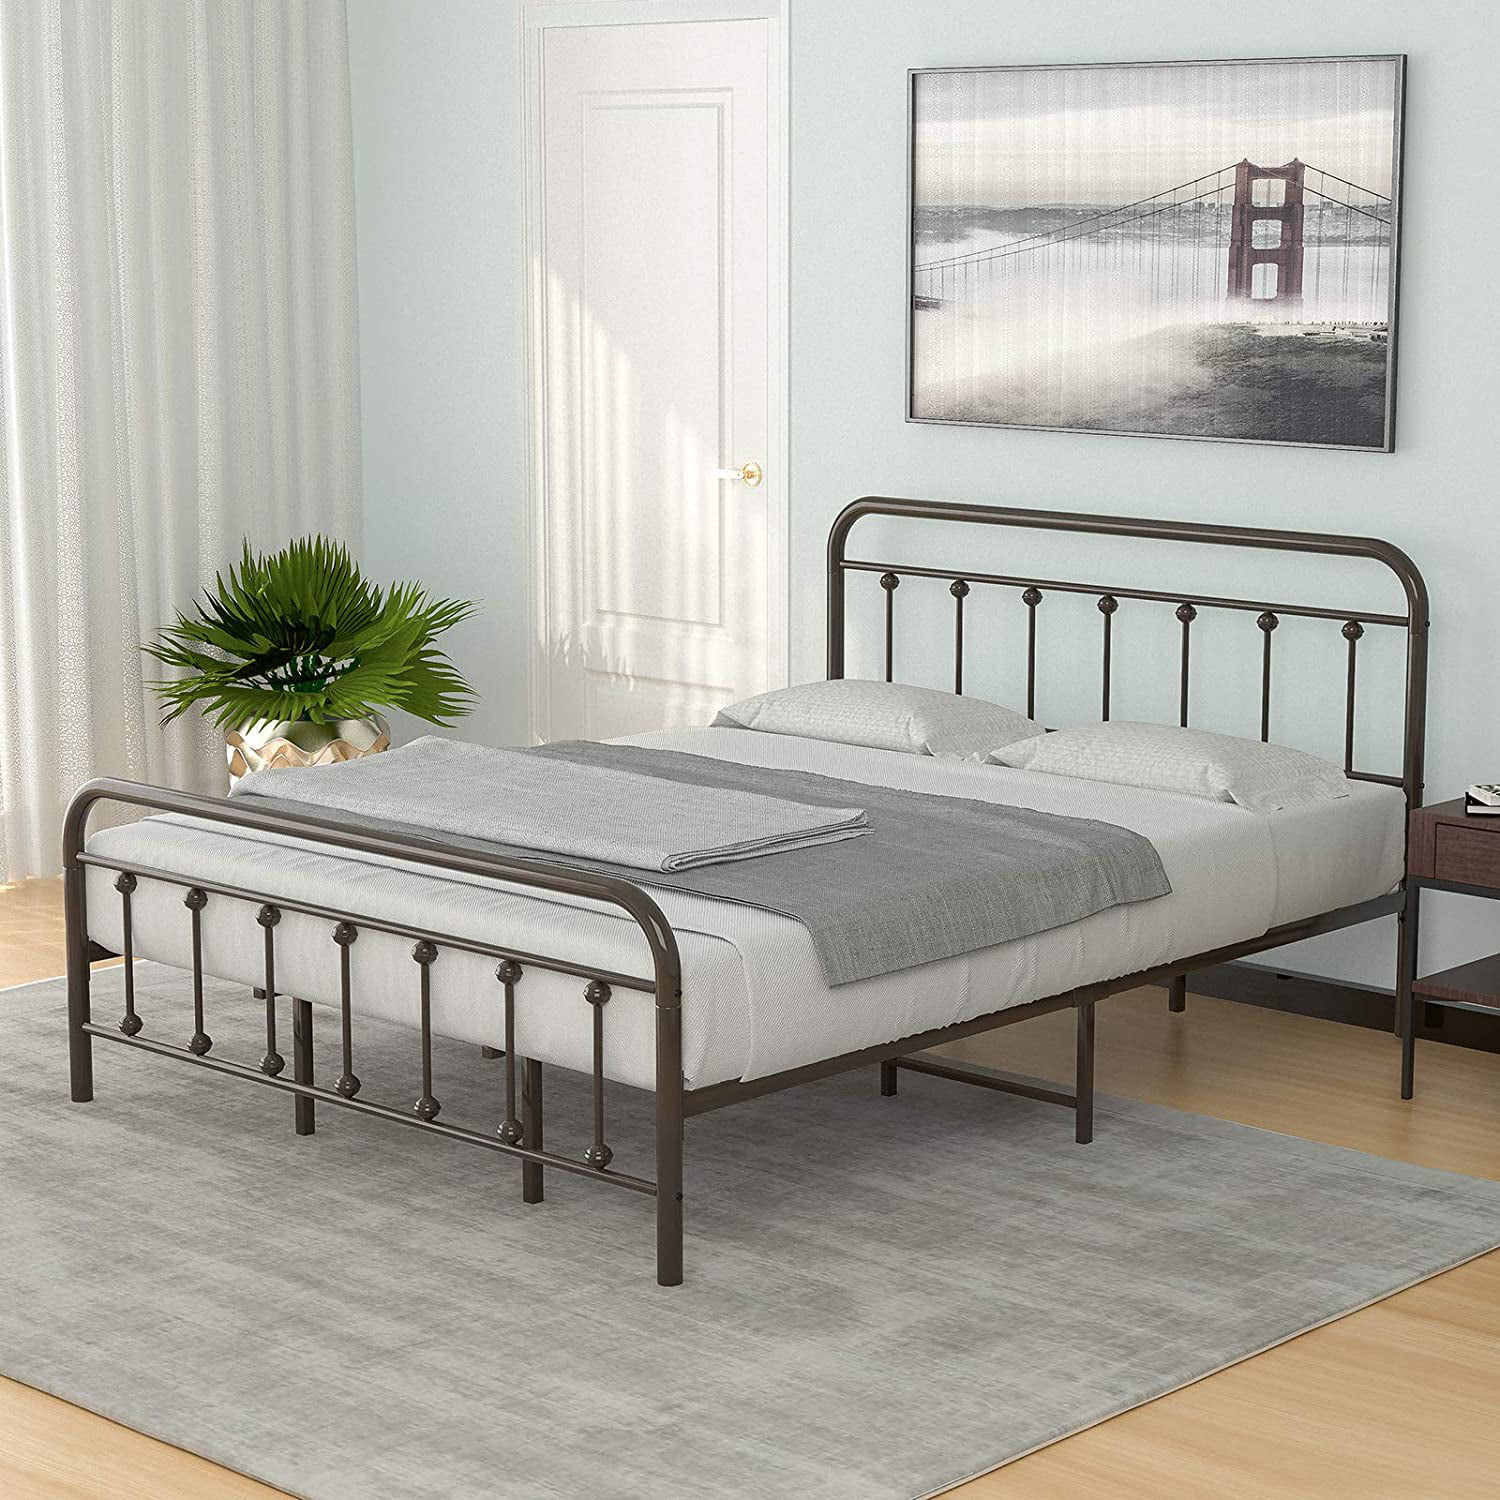 Mecor King Size Metal Platform Bed, Heavy Duty King Bed